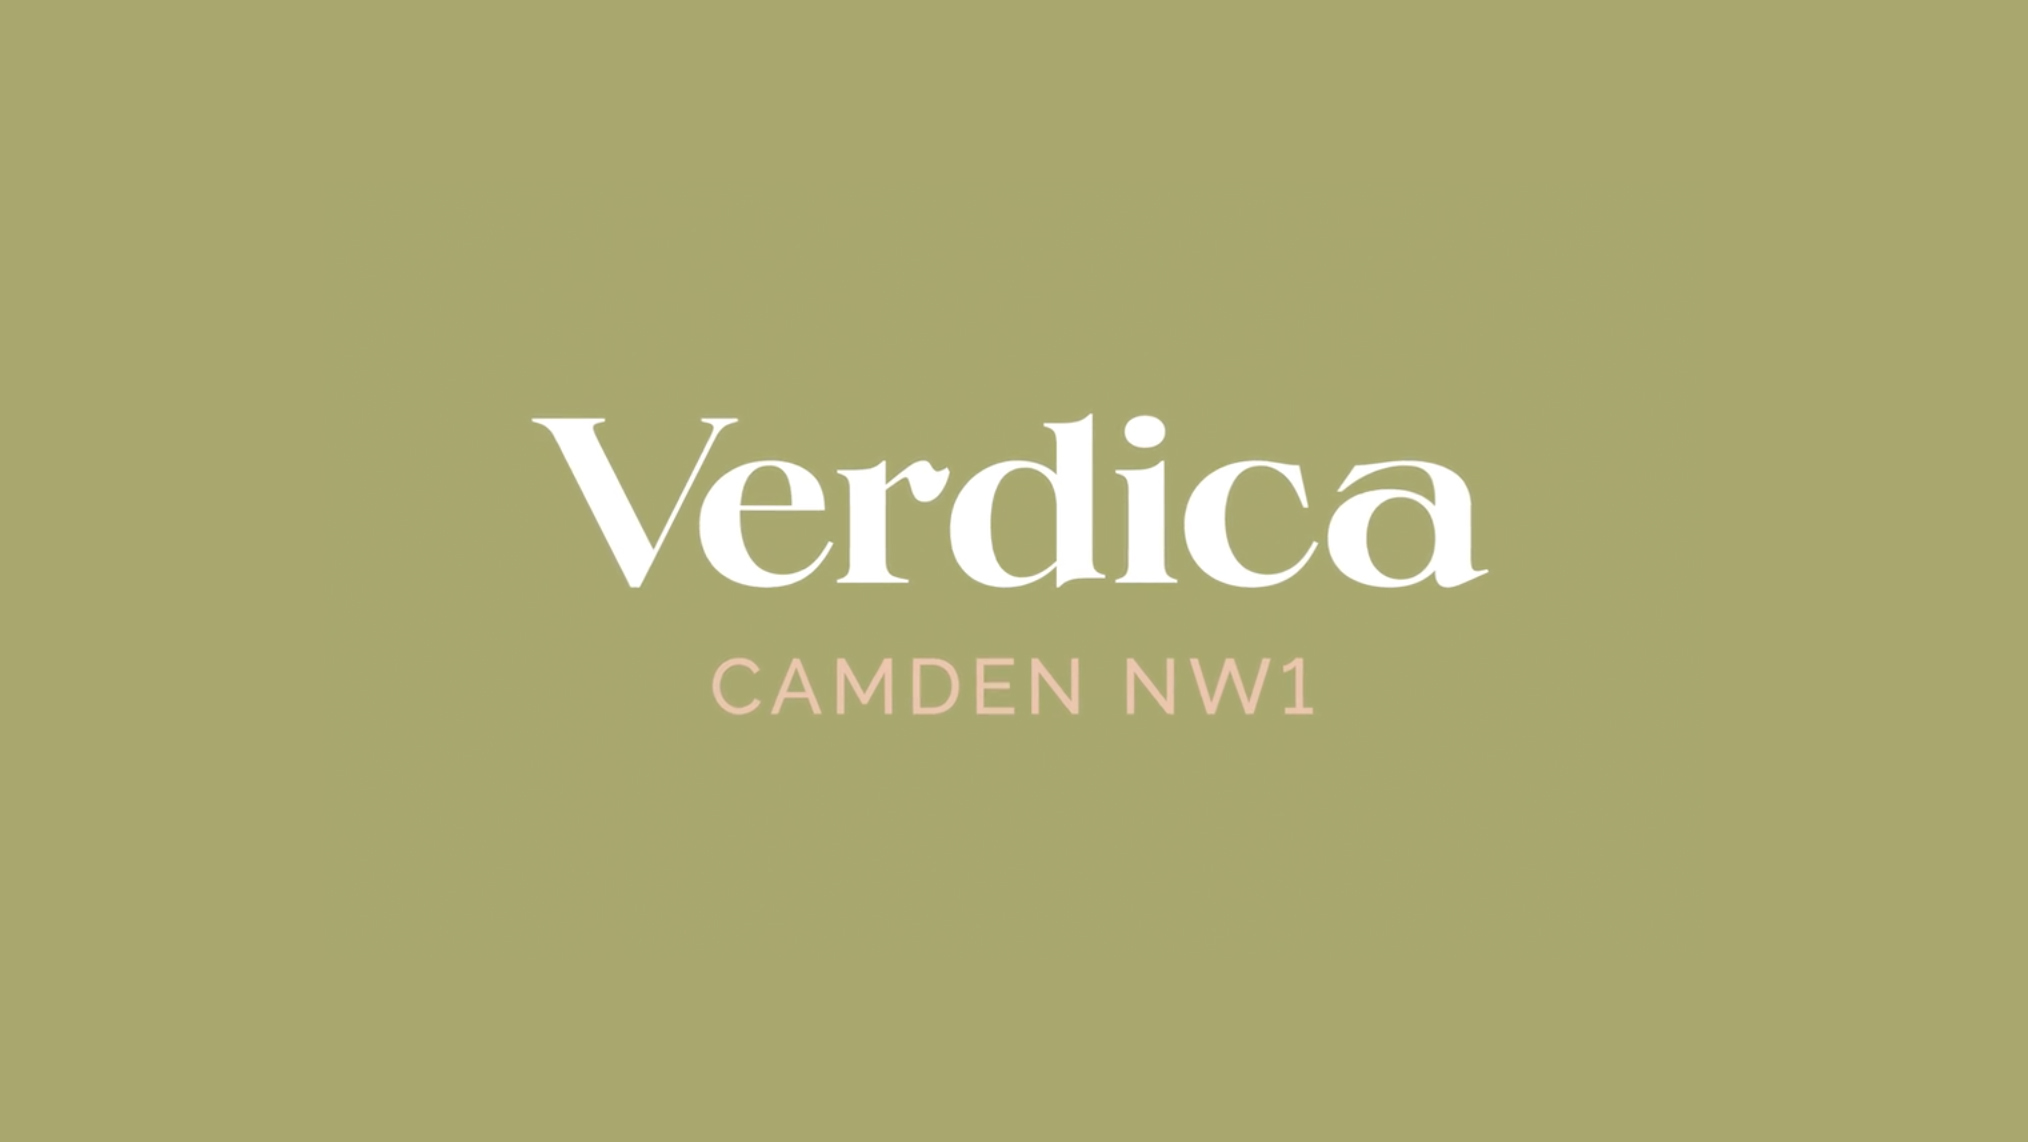 Show home launch at Verdica